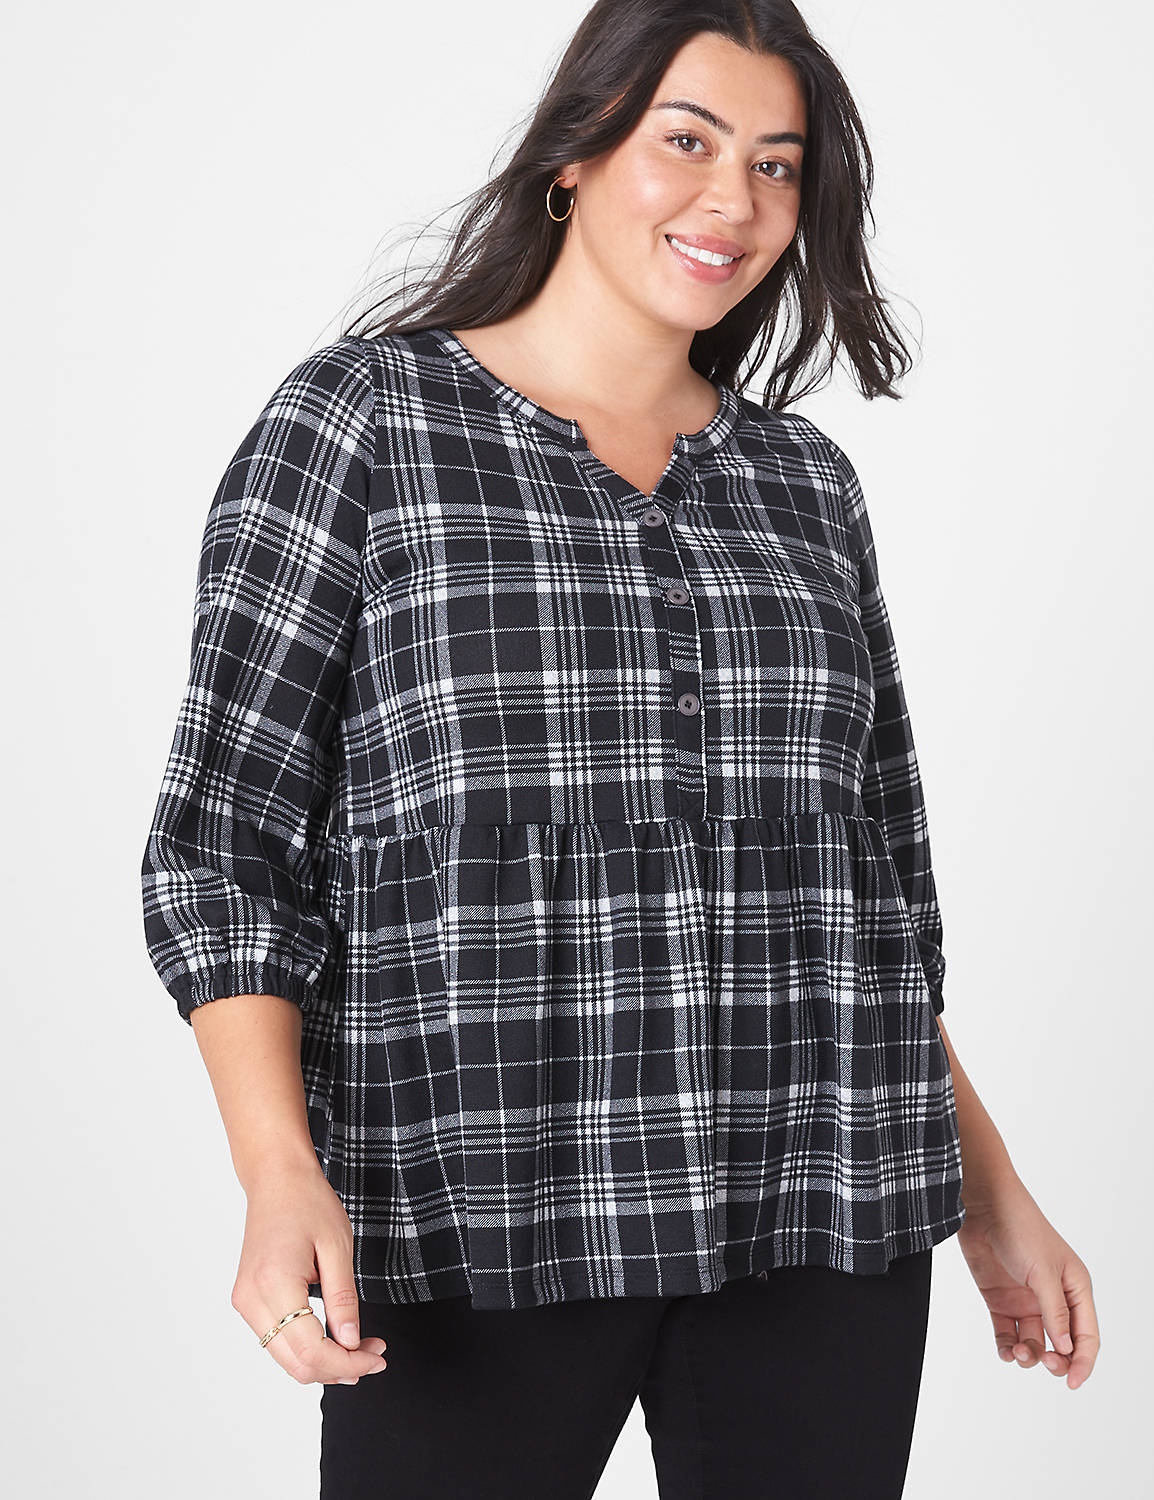 Plus Size Clothing Store at Outlets of Des Moines in Altoona | Lane Bryant